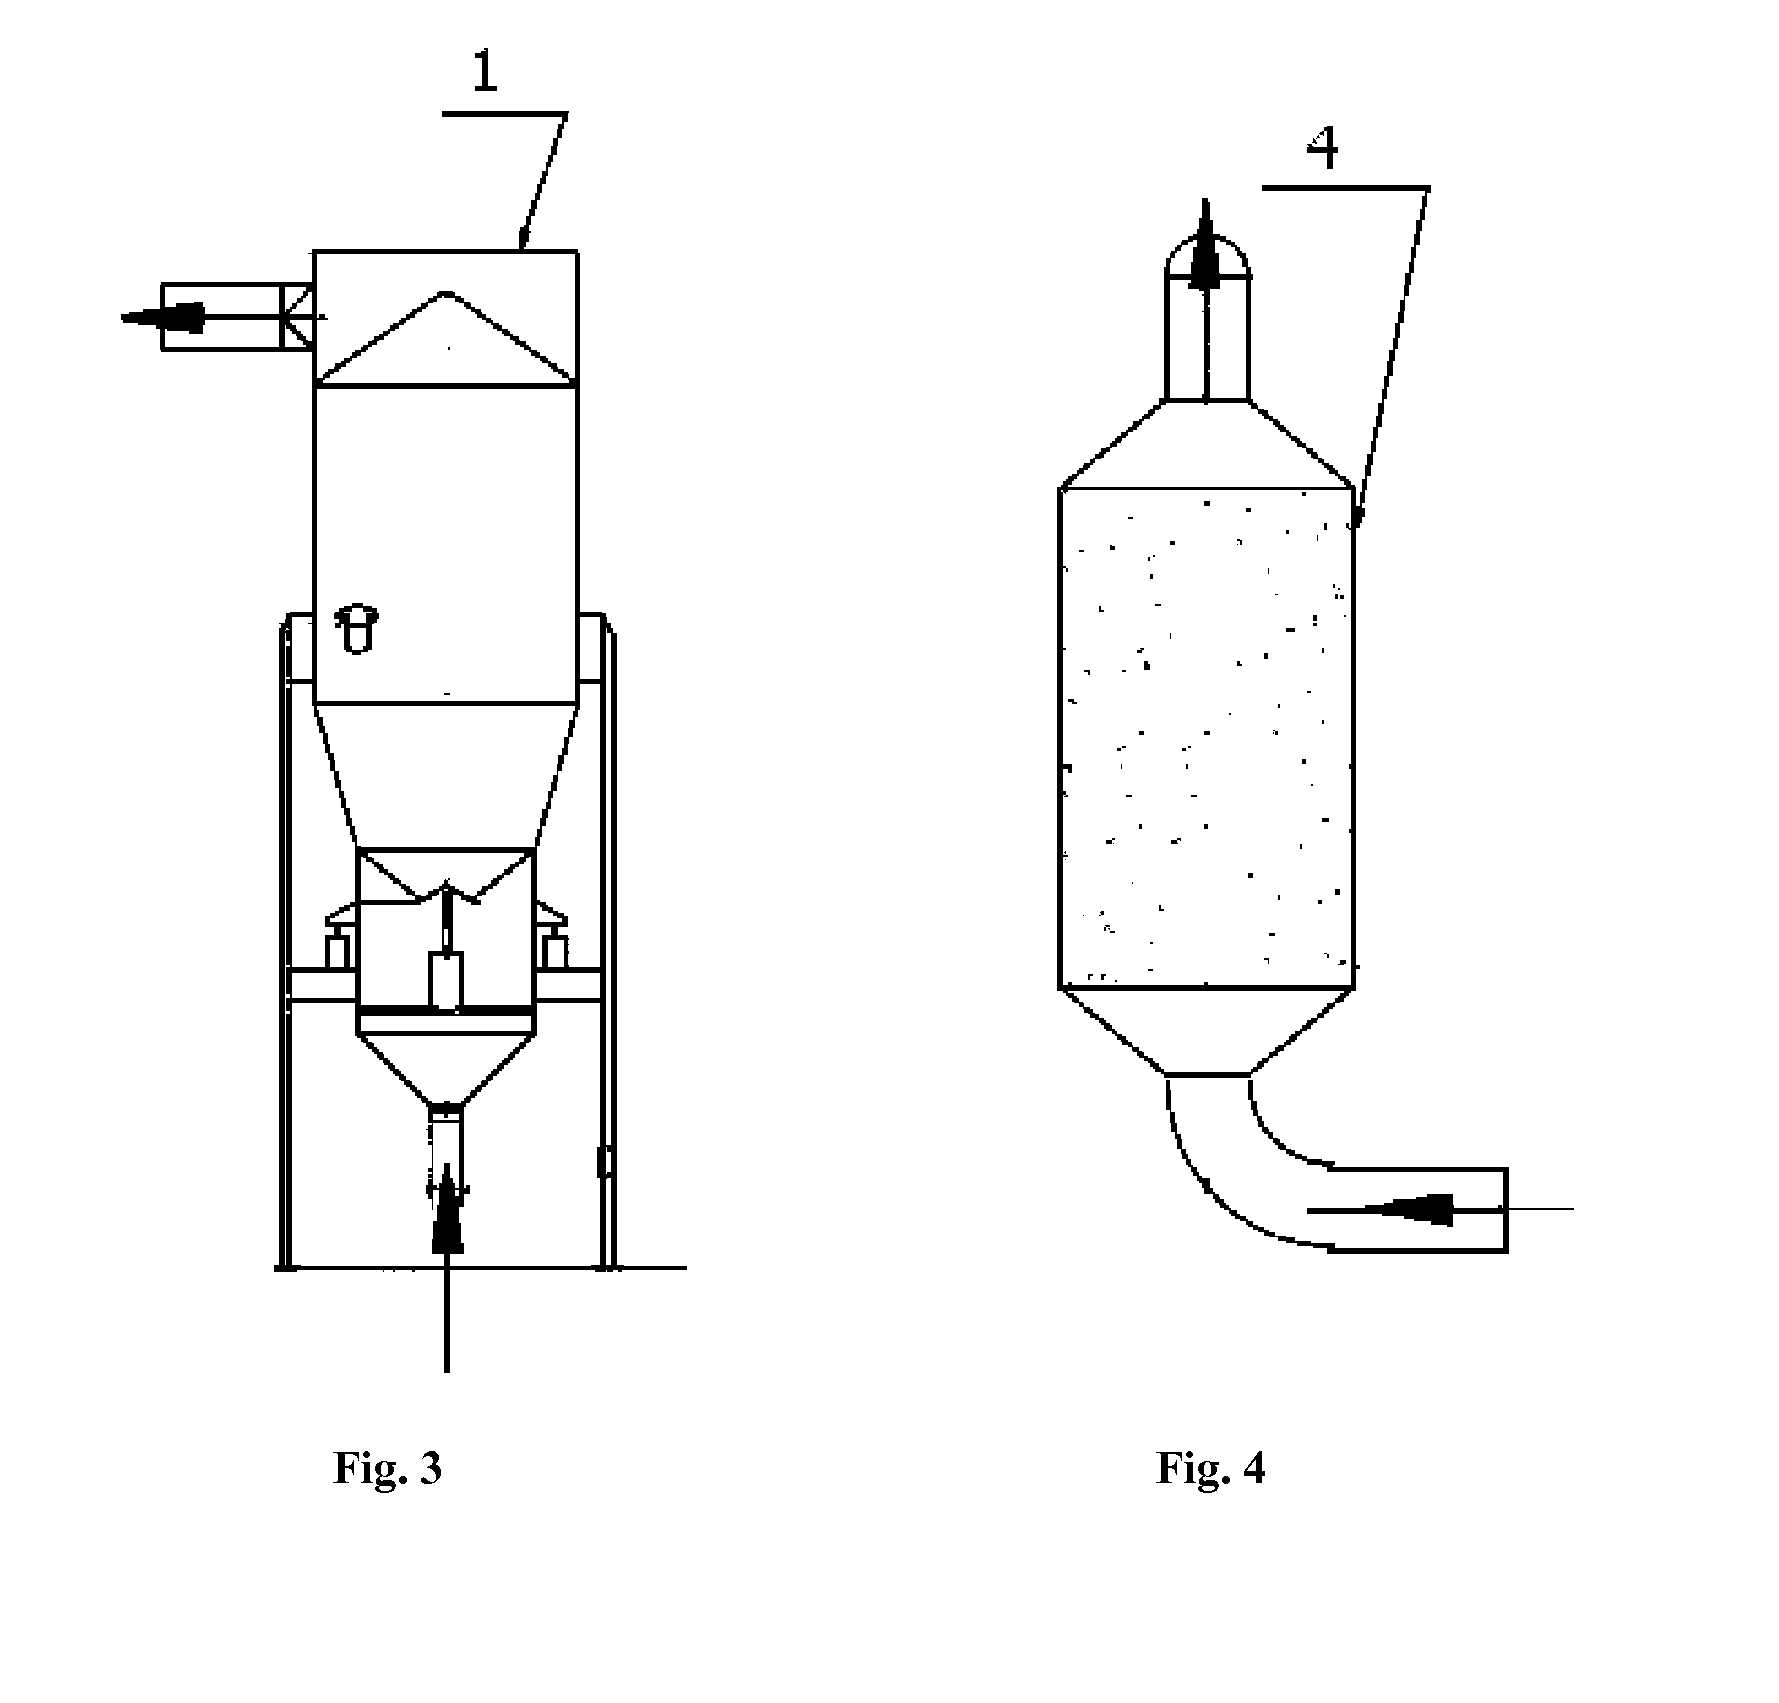 Method for Preparing Controlled Release Fertilizer with Water-Based Coating on the Basis of Closed Circulating Fluidized Bed, and Device therefor